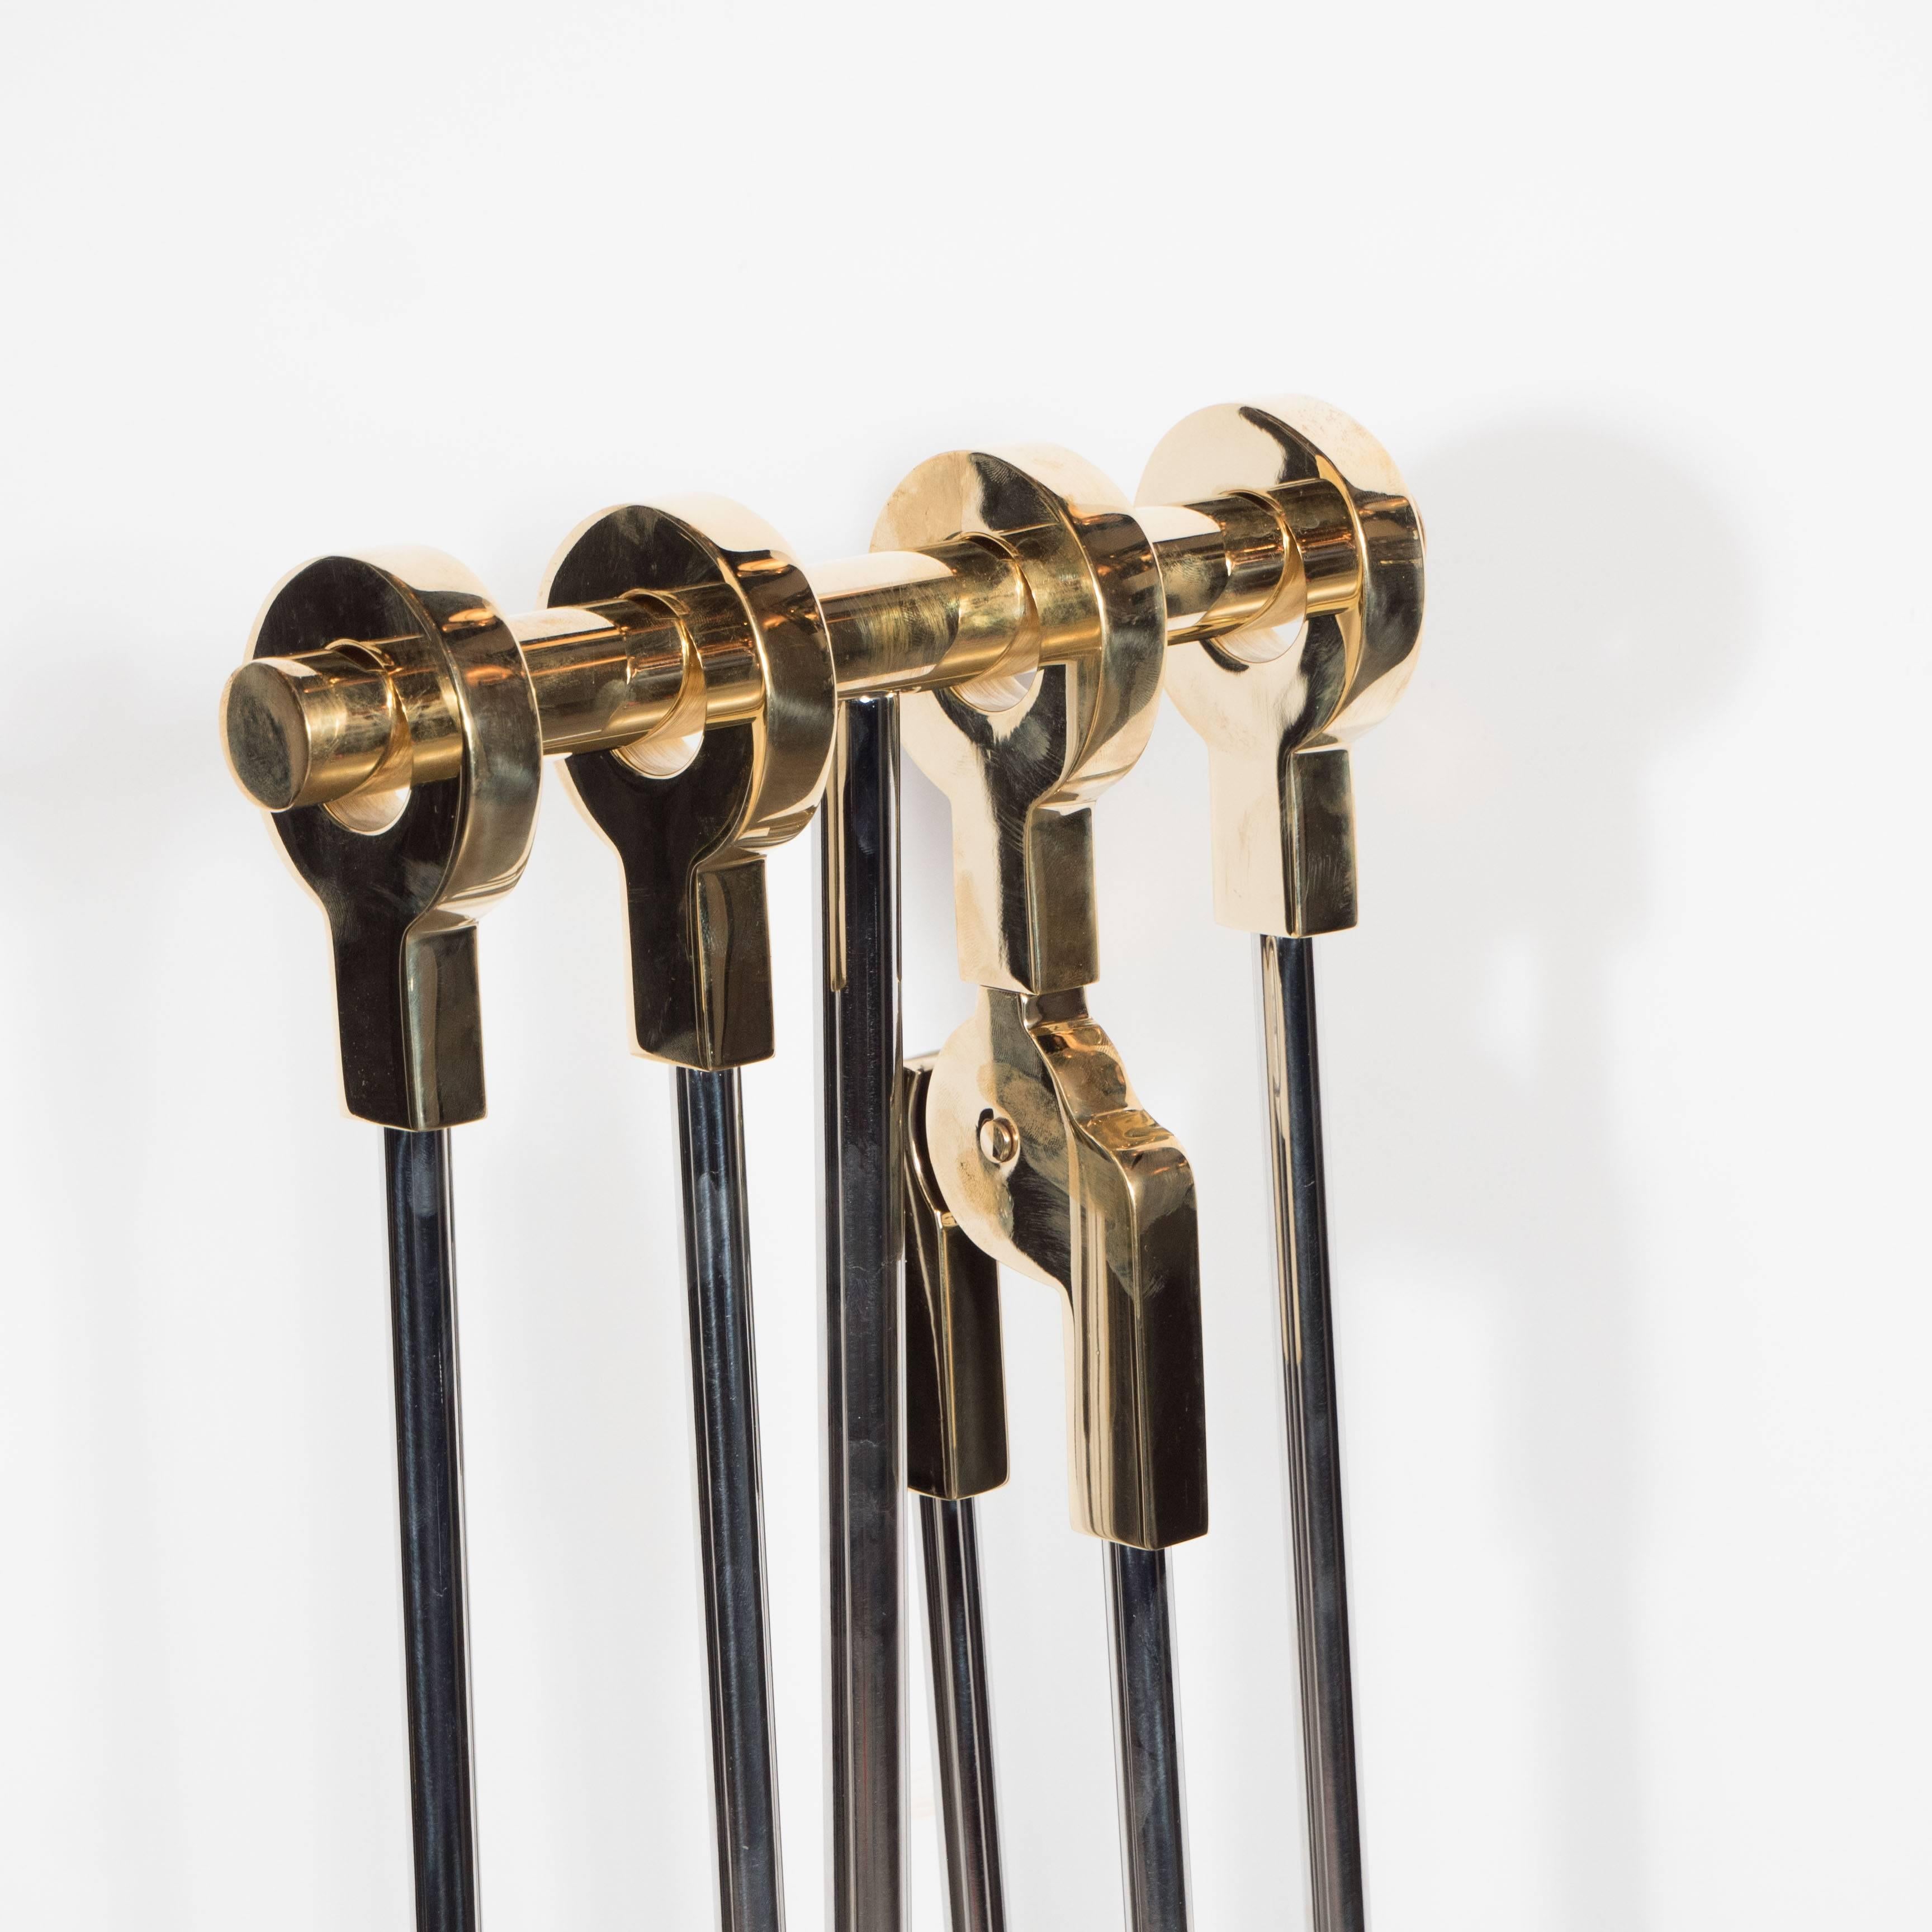 Modernist Four-Piece Polished Nickel Fire Tool Set with Polished Brass Handles In Excellent Condition For Sale In New York, NY